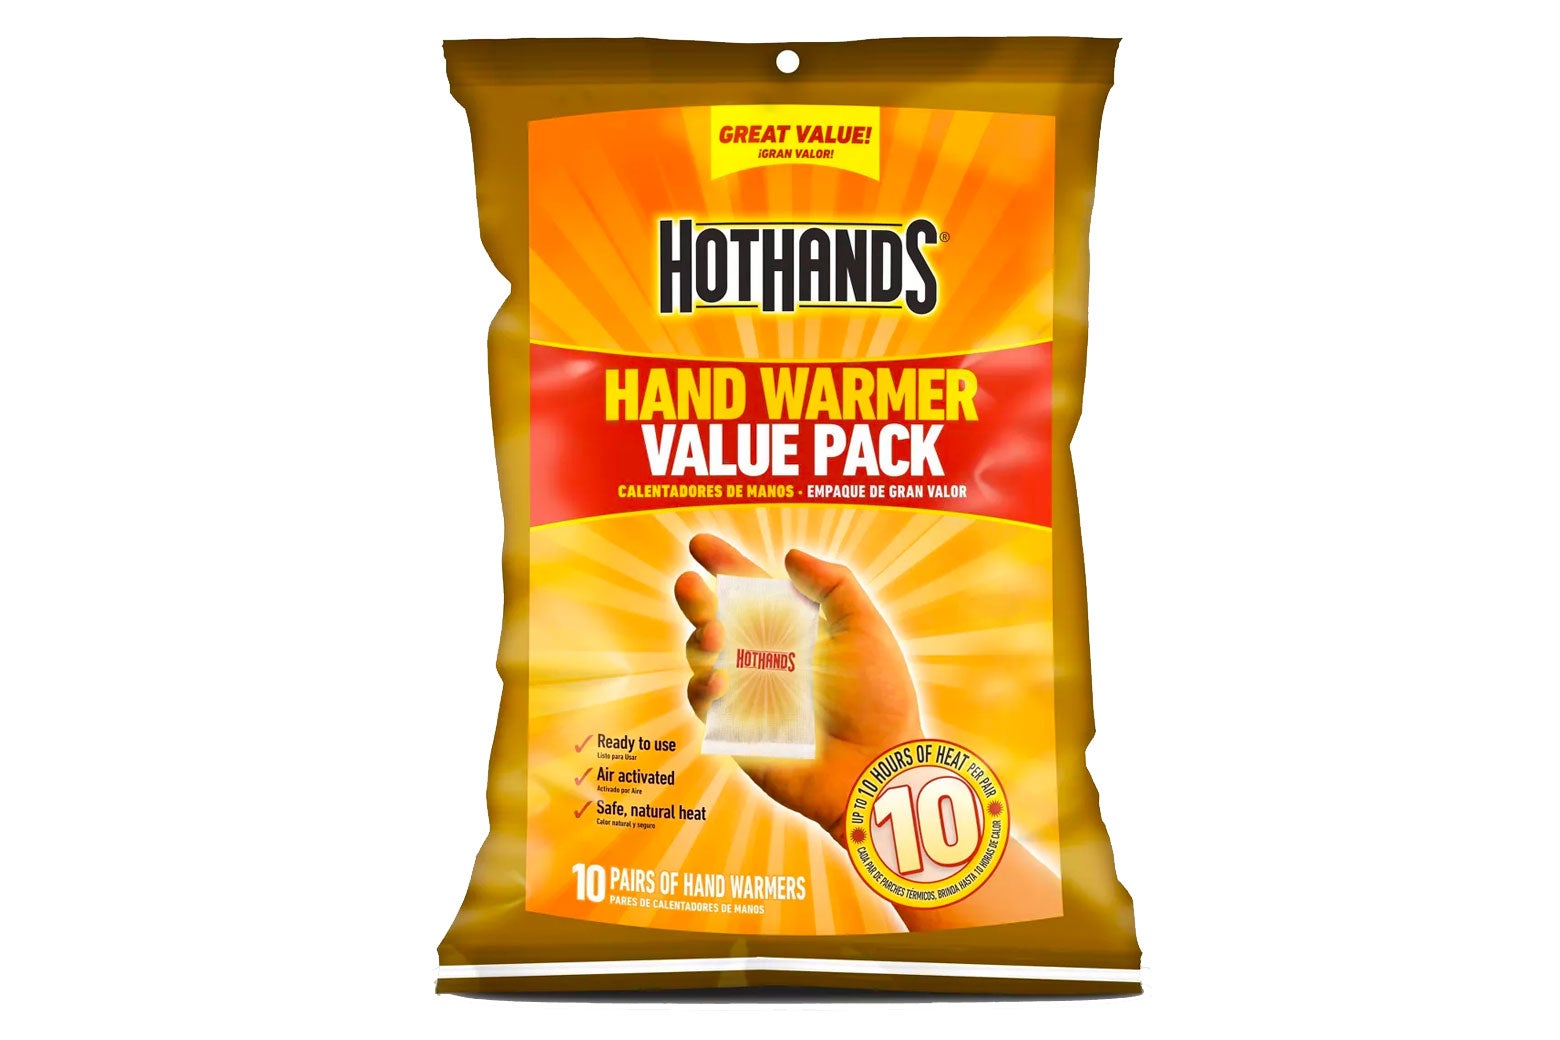 It's a pack of HotHands warmers, illustrated with a bit of a glow.